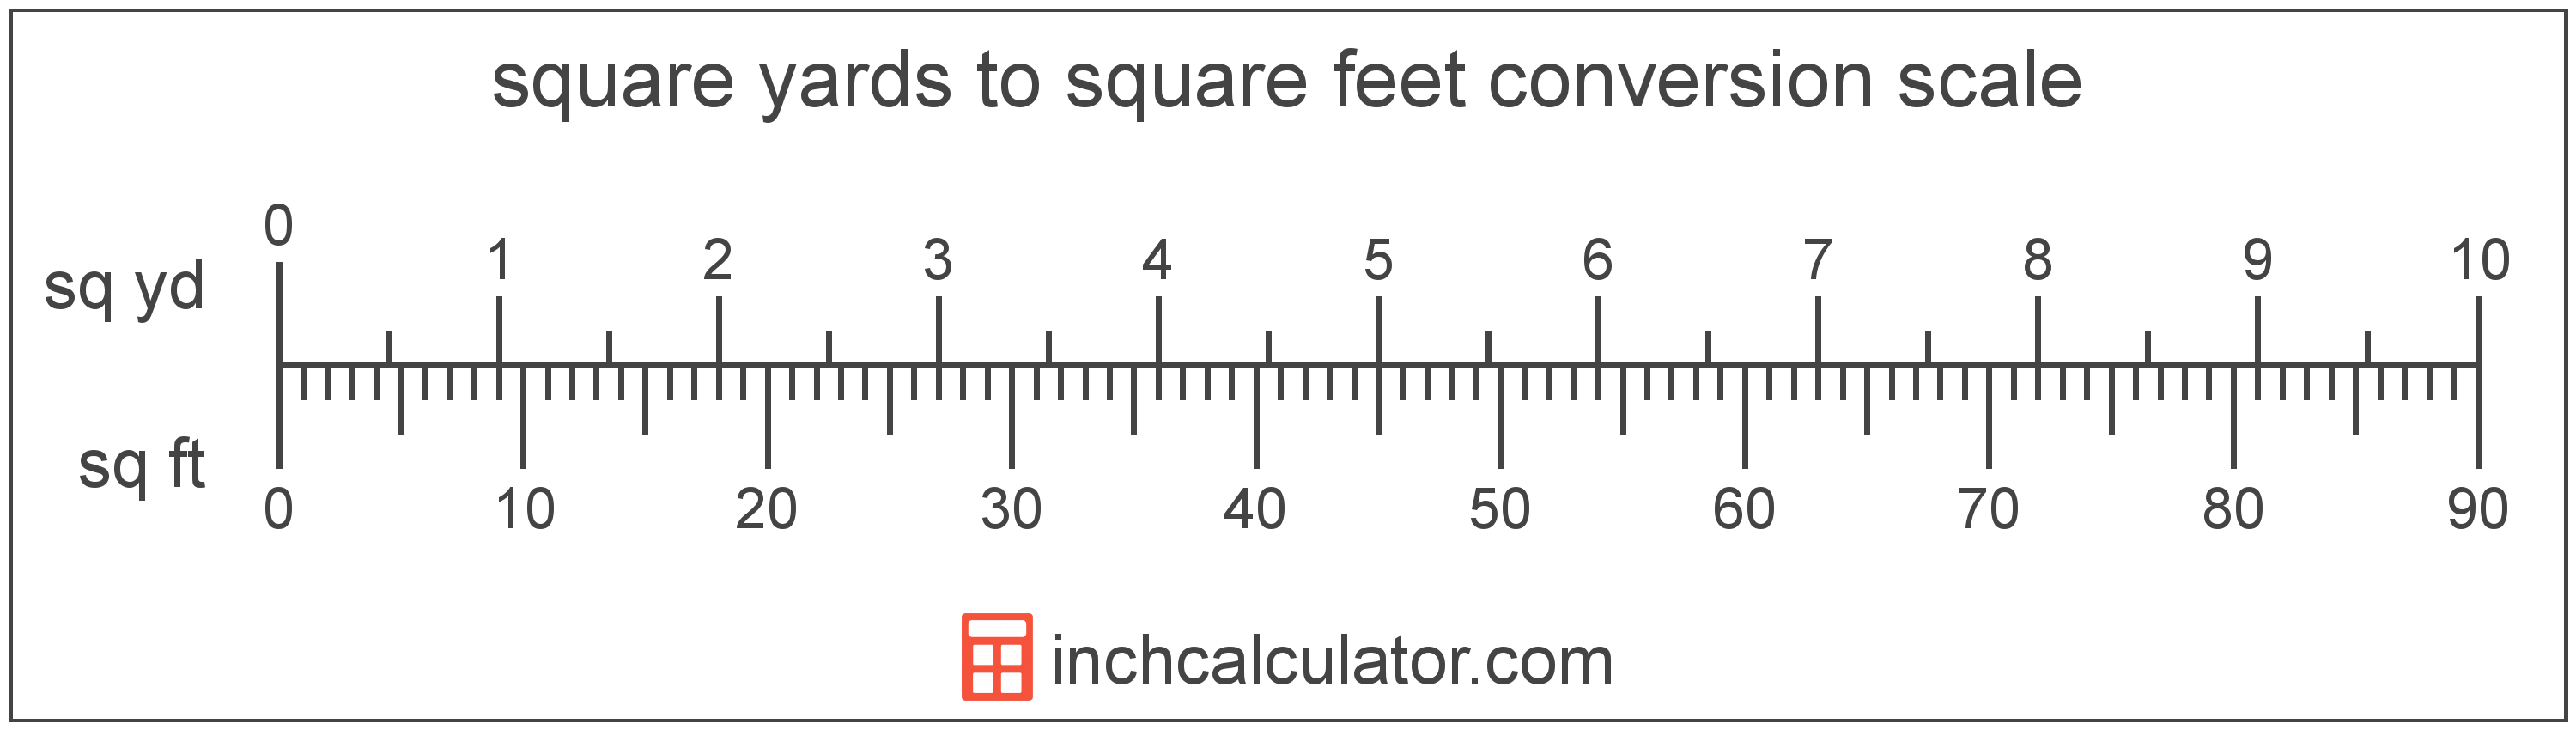 conversion scale showing square feet and equivalent square yards area values